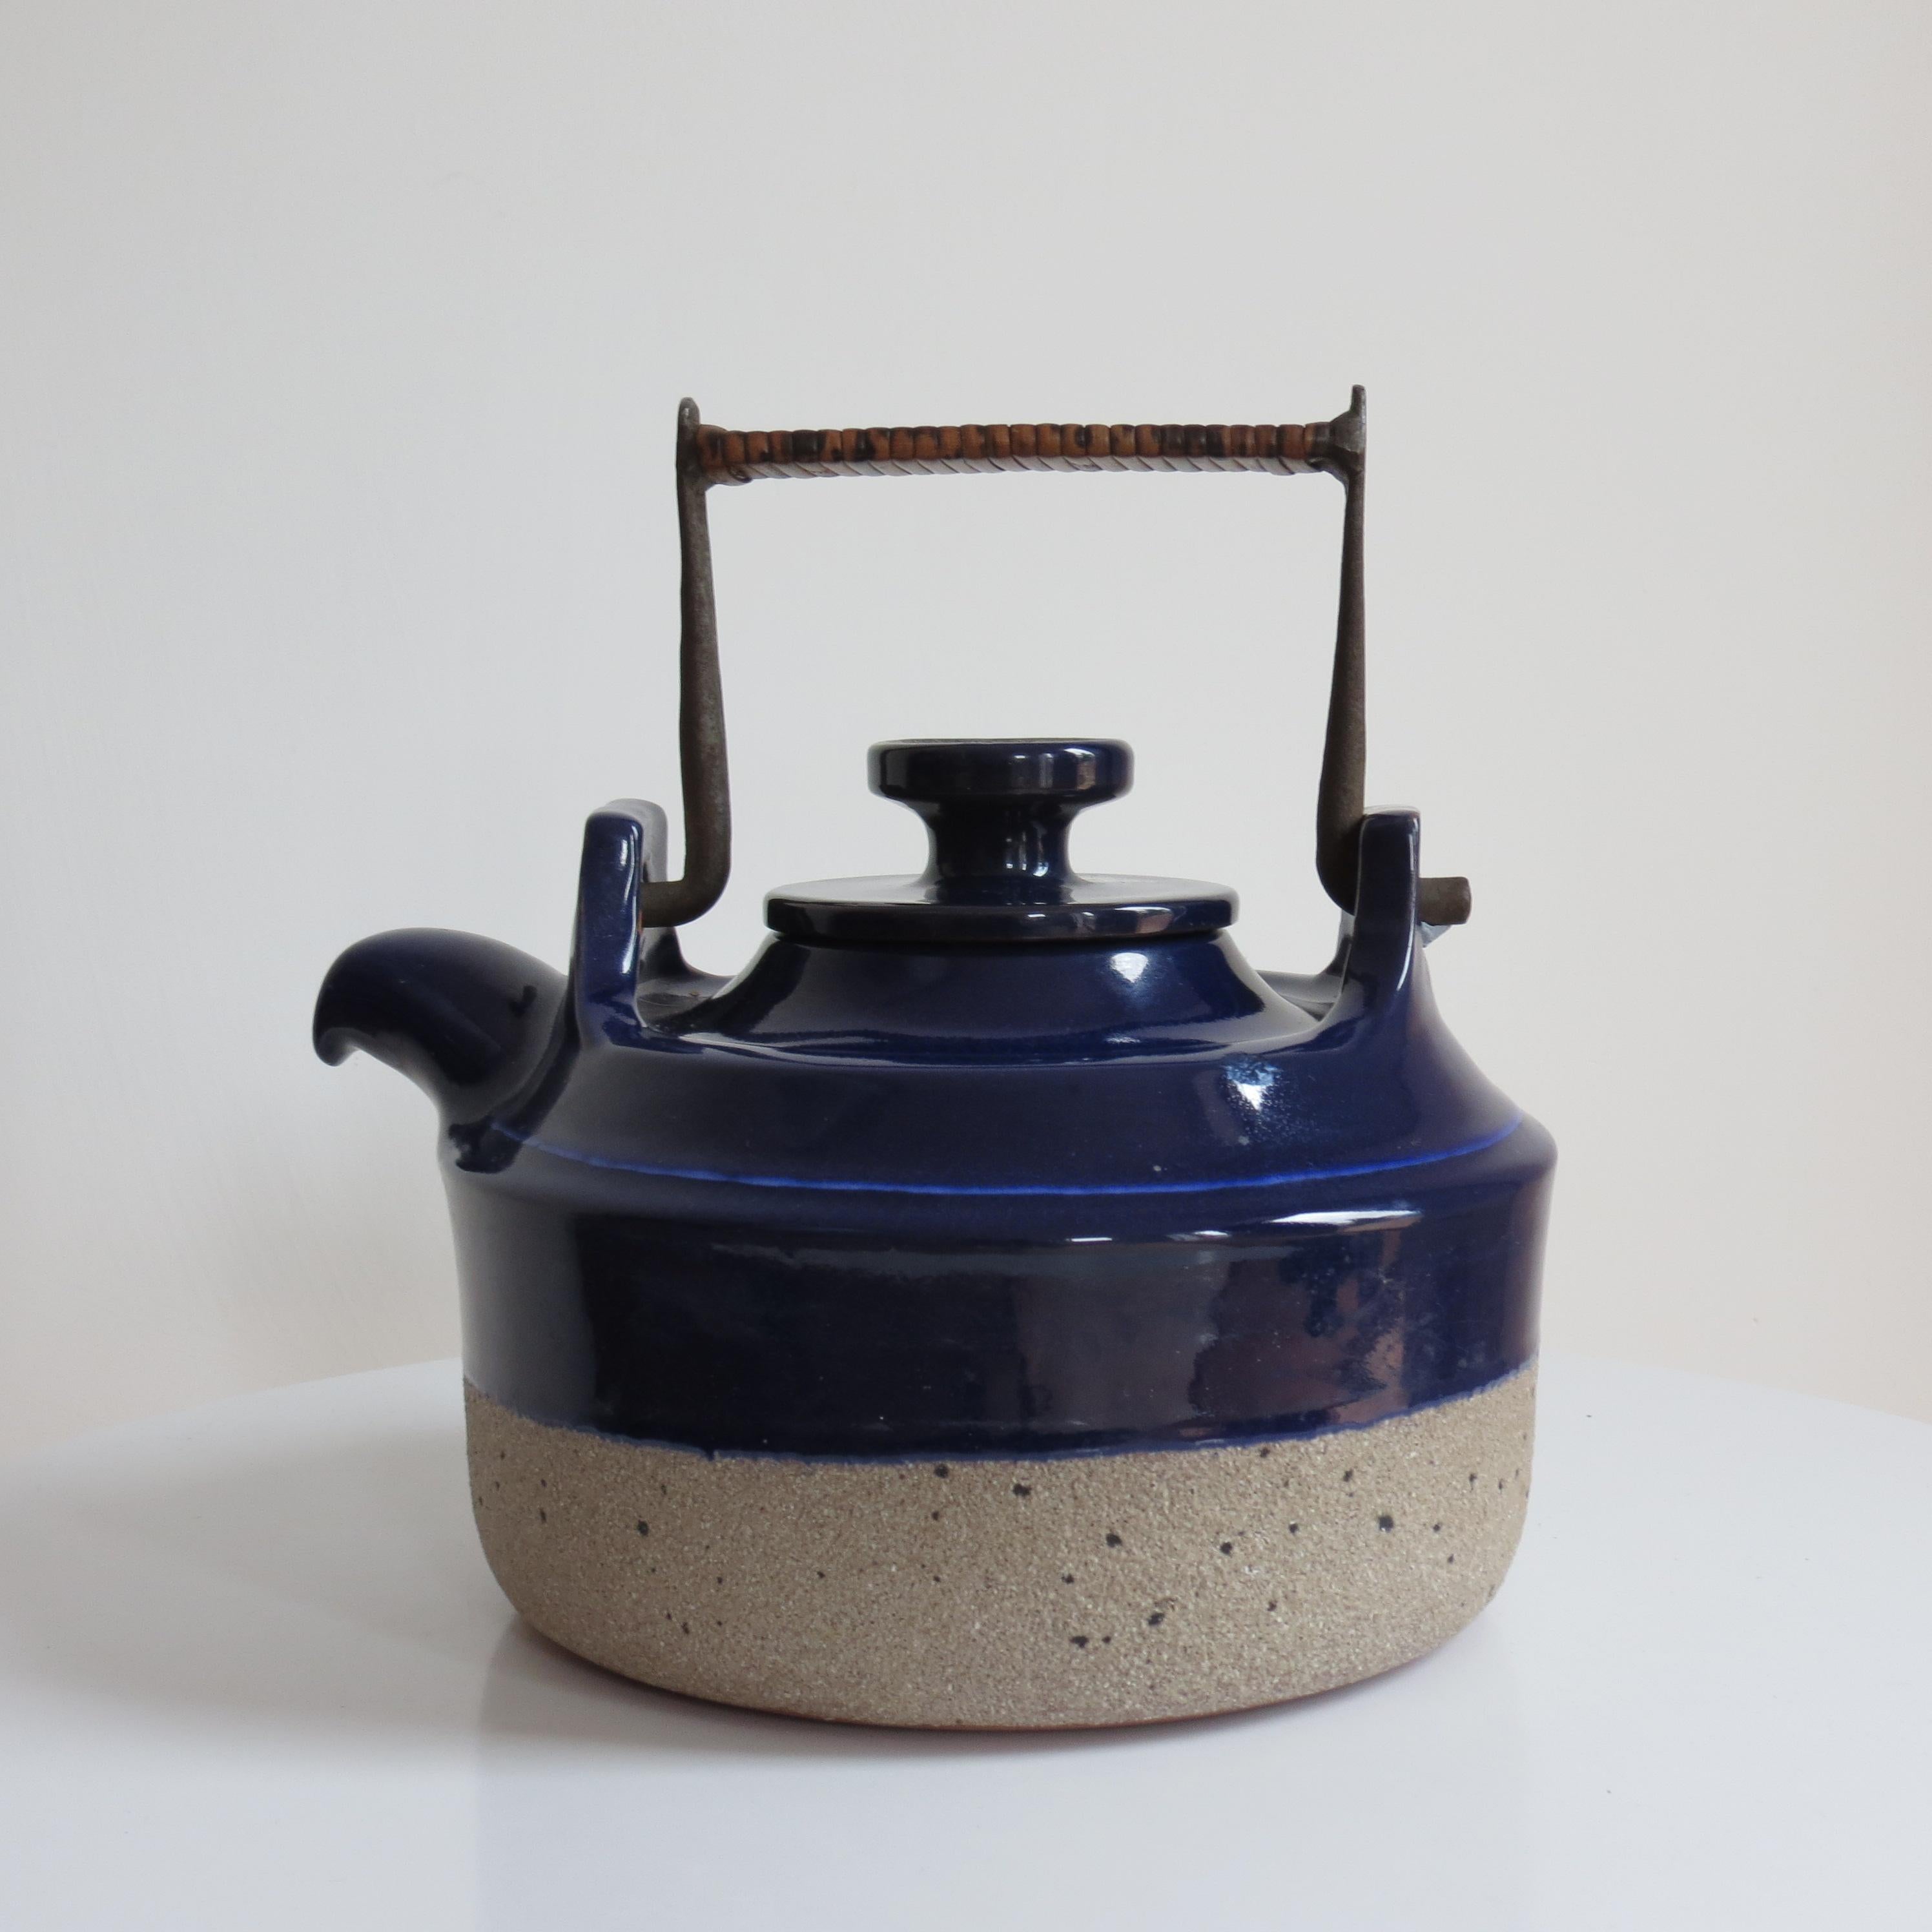 1960s Earthenware teapot, designed by Thomas Hellstrom for Nittsjo Sweden. Wonderful shaped, handmade earthenware and blue glaze teapot, formed steel handle decorated with rattan. The teapot is stamped to the underside and reads 